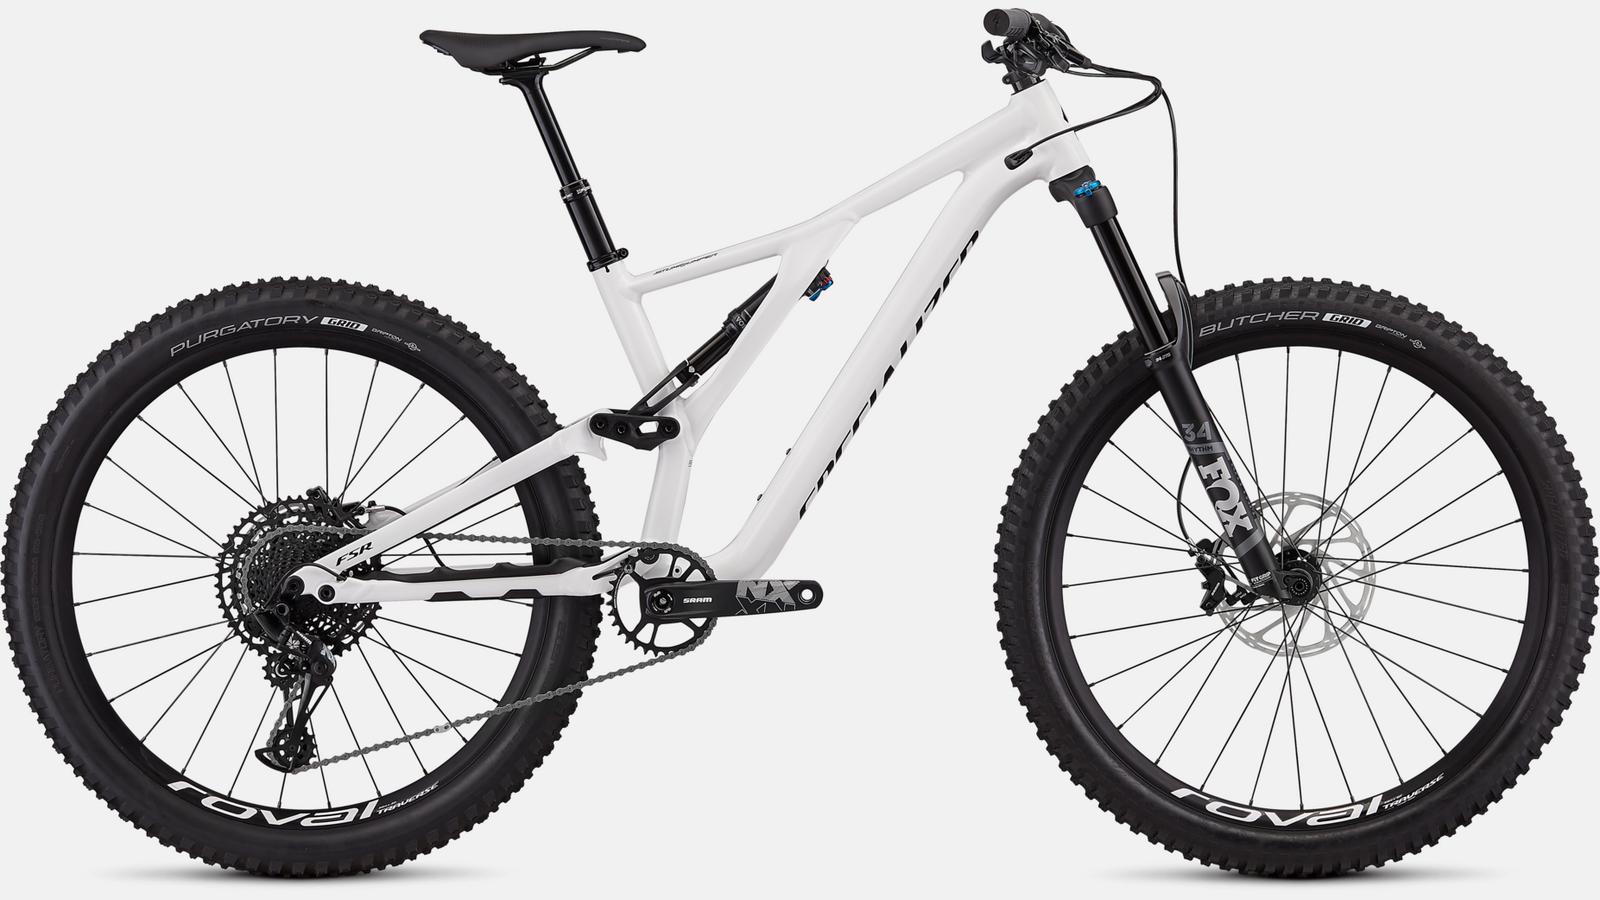 Paint for 2019 Specialized Men's Stumpjumper Comp Alloy 27.5 - 12-speed - Gloss White